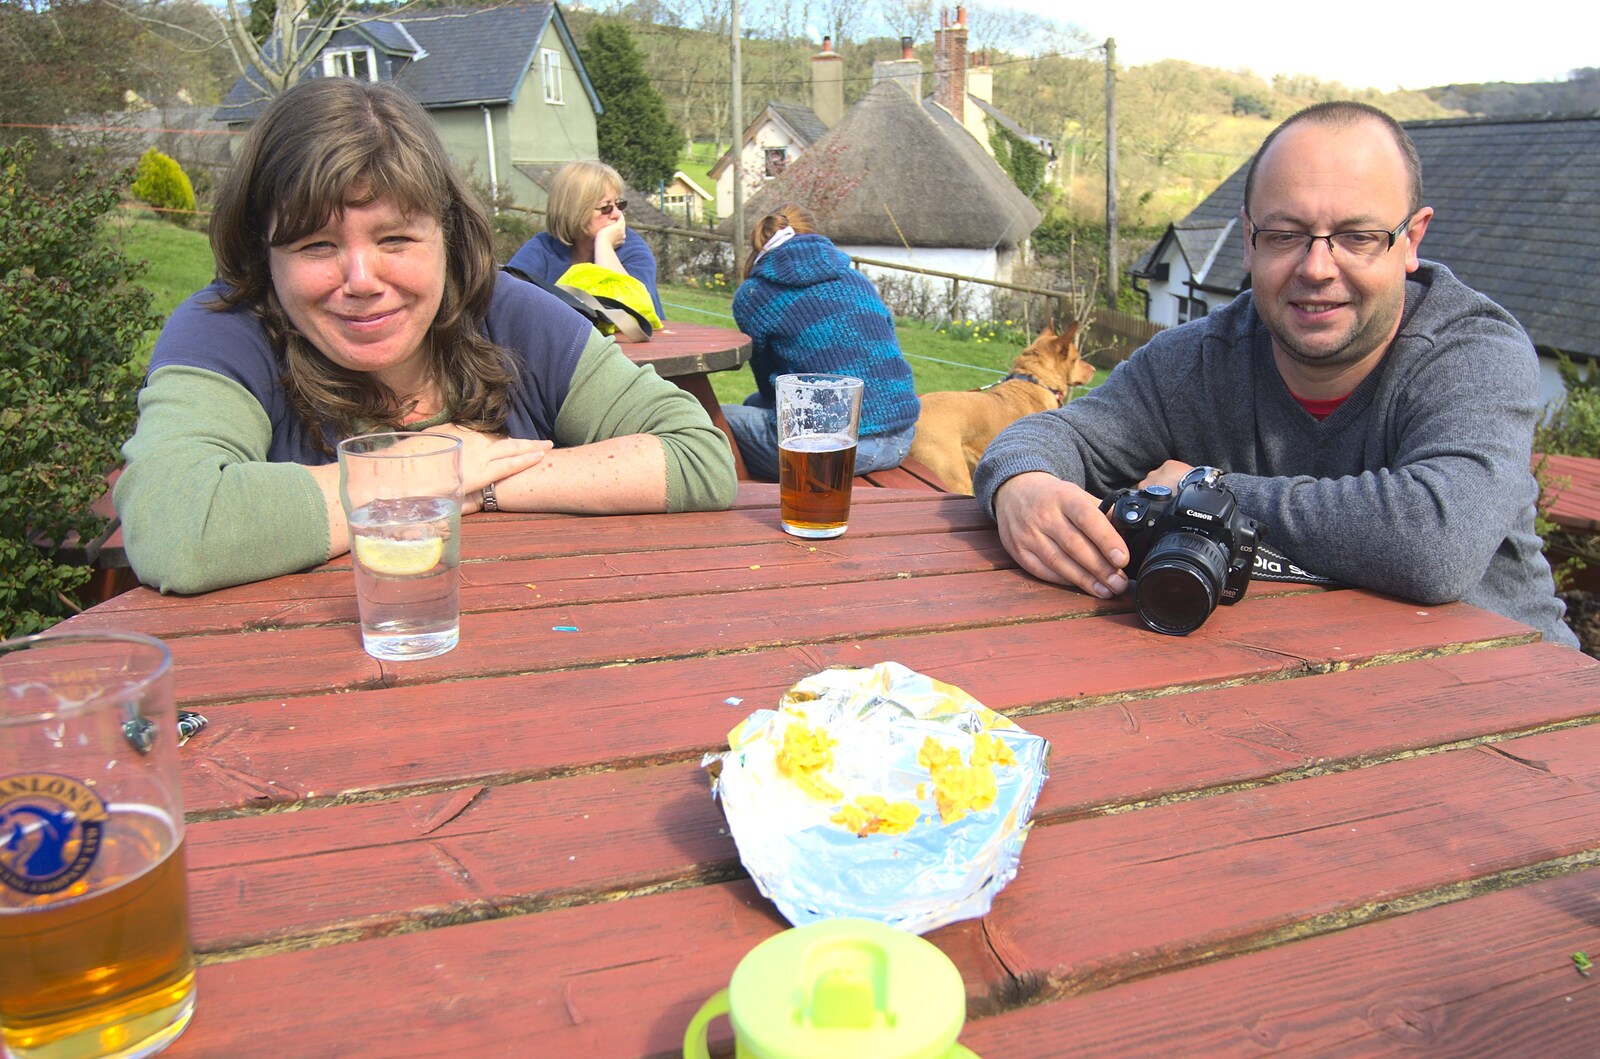 Pub lunch at Sandy Park from An Easter Weekend in Chagford, Devon - 12th April 2009